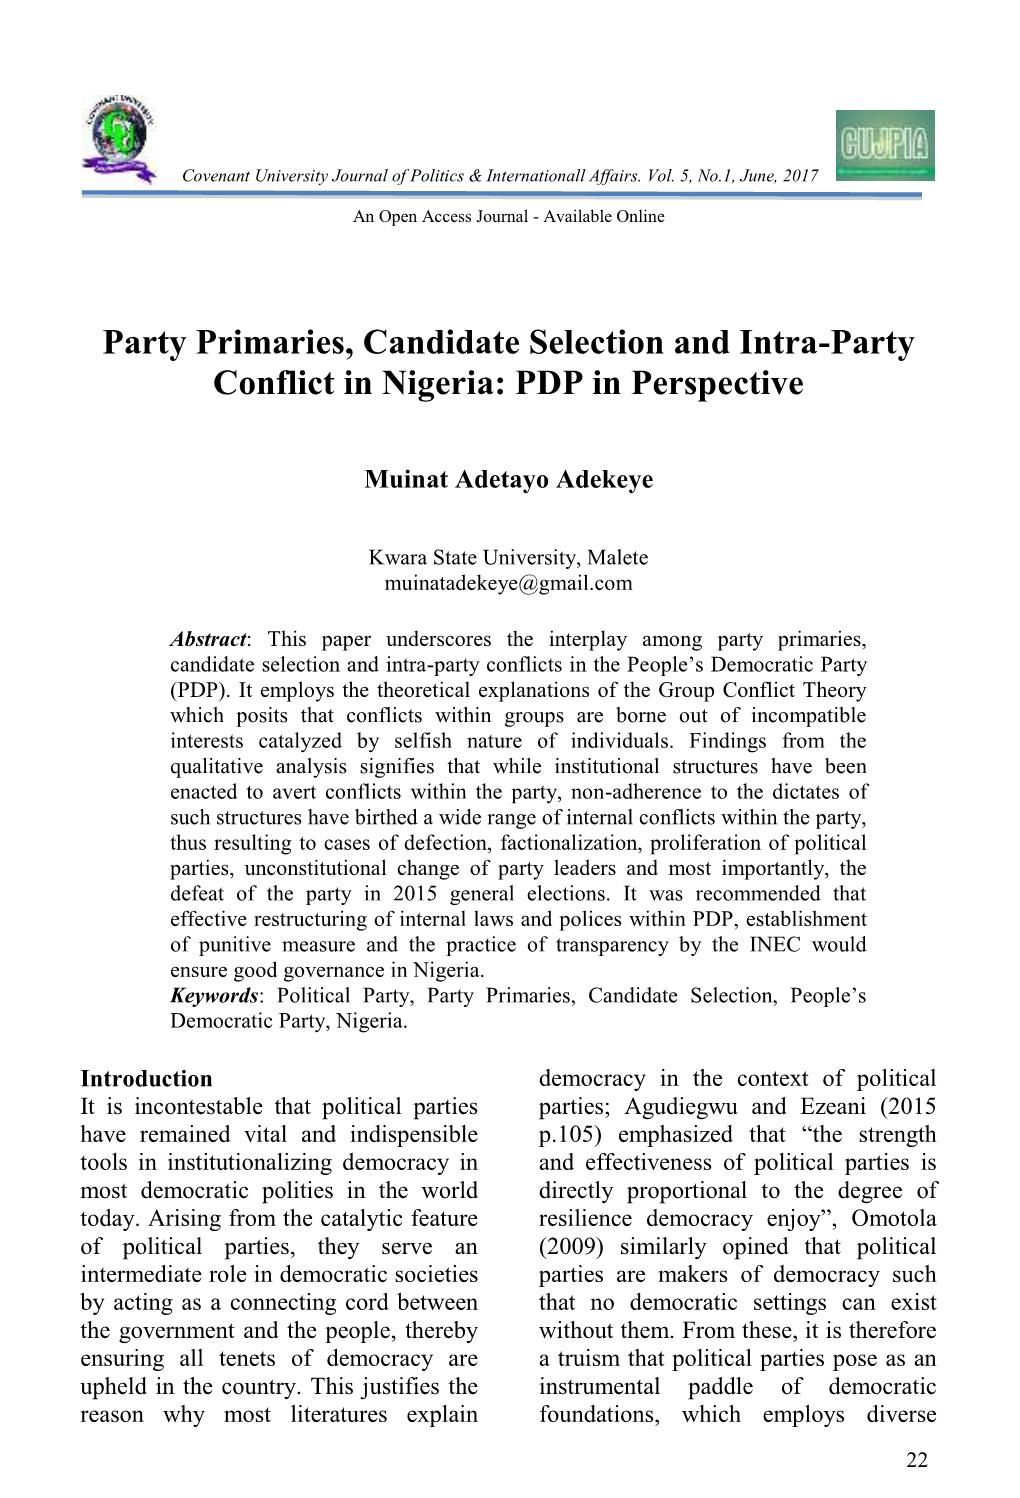 Party Primaries, Candidate Selection and Intra-Party Conflict in Nigeria: PDP in Perspective